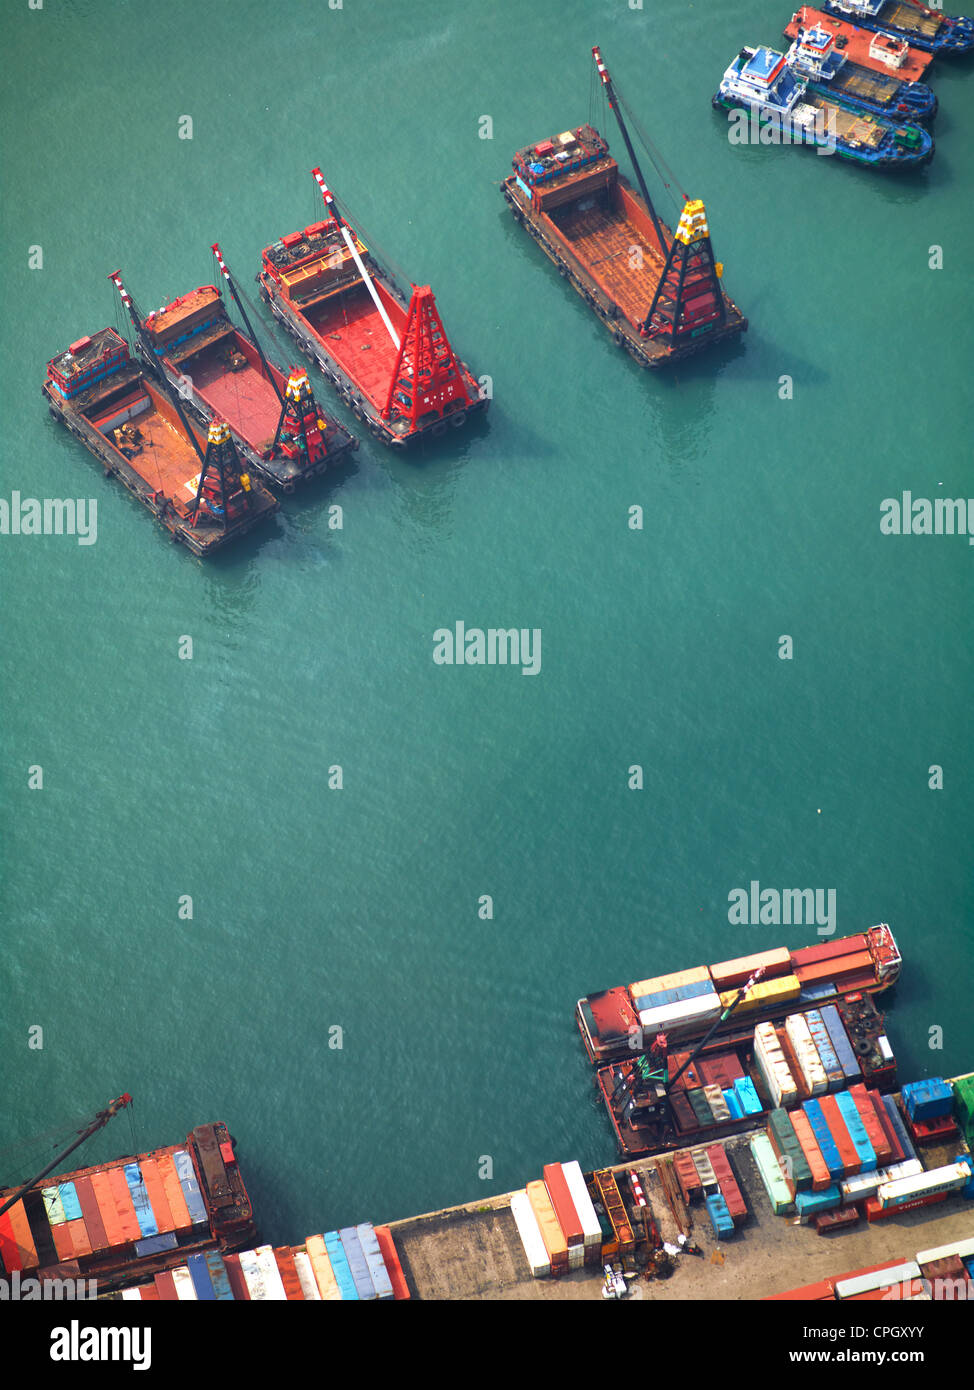 Aerial view of Hong Kong ships, containers and cargo vessels in Victoria Harbour. September 2011. Stock Photo